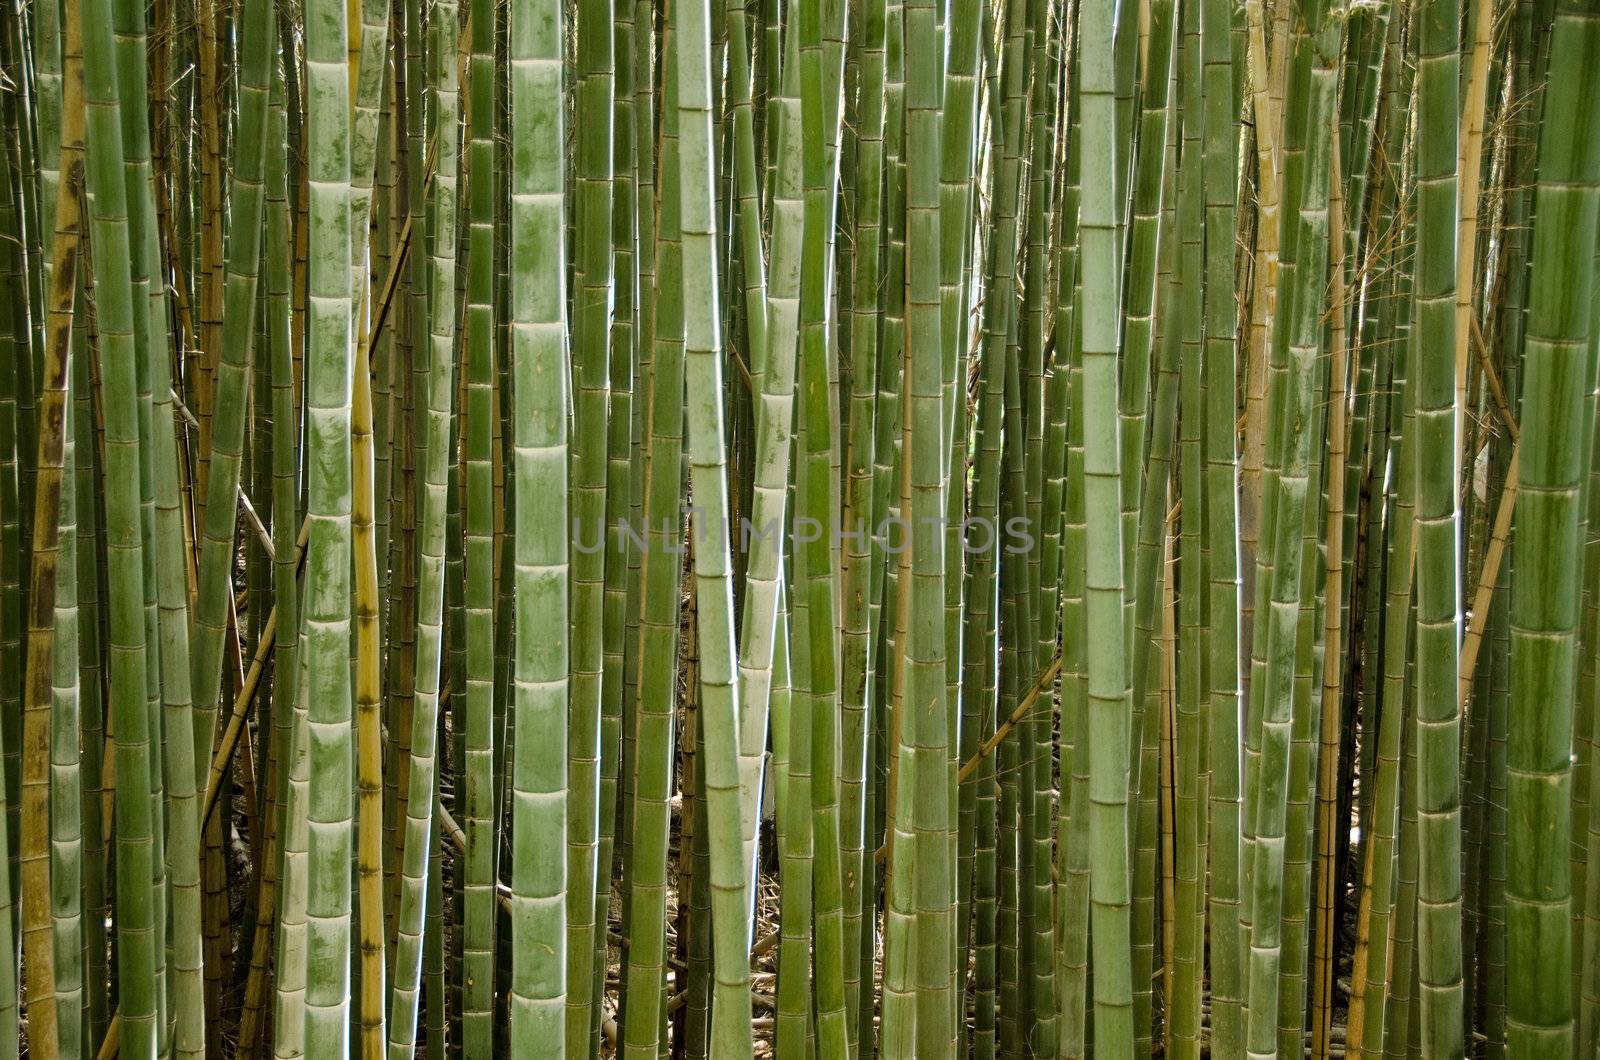 Background of a green stems of a japanese bamboo forest seen from the side